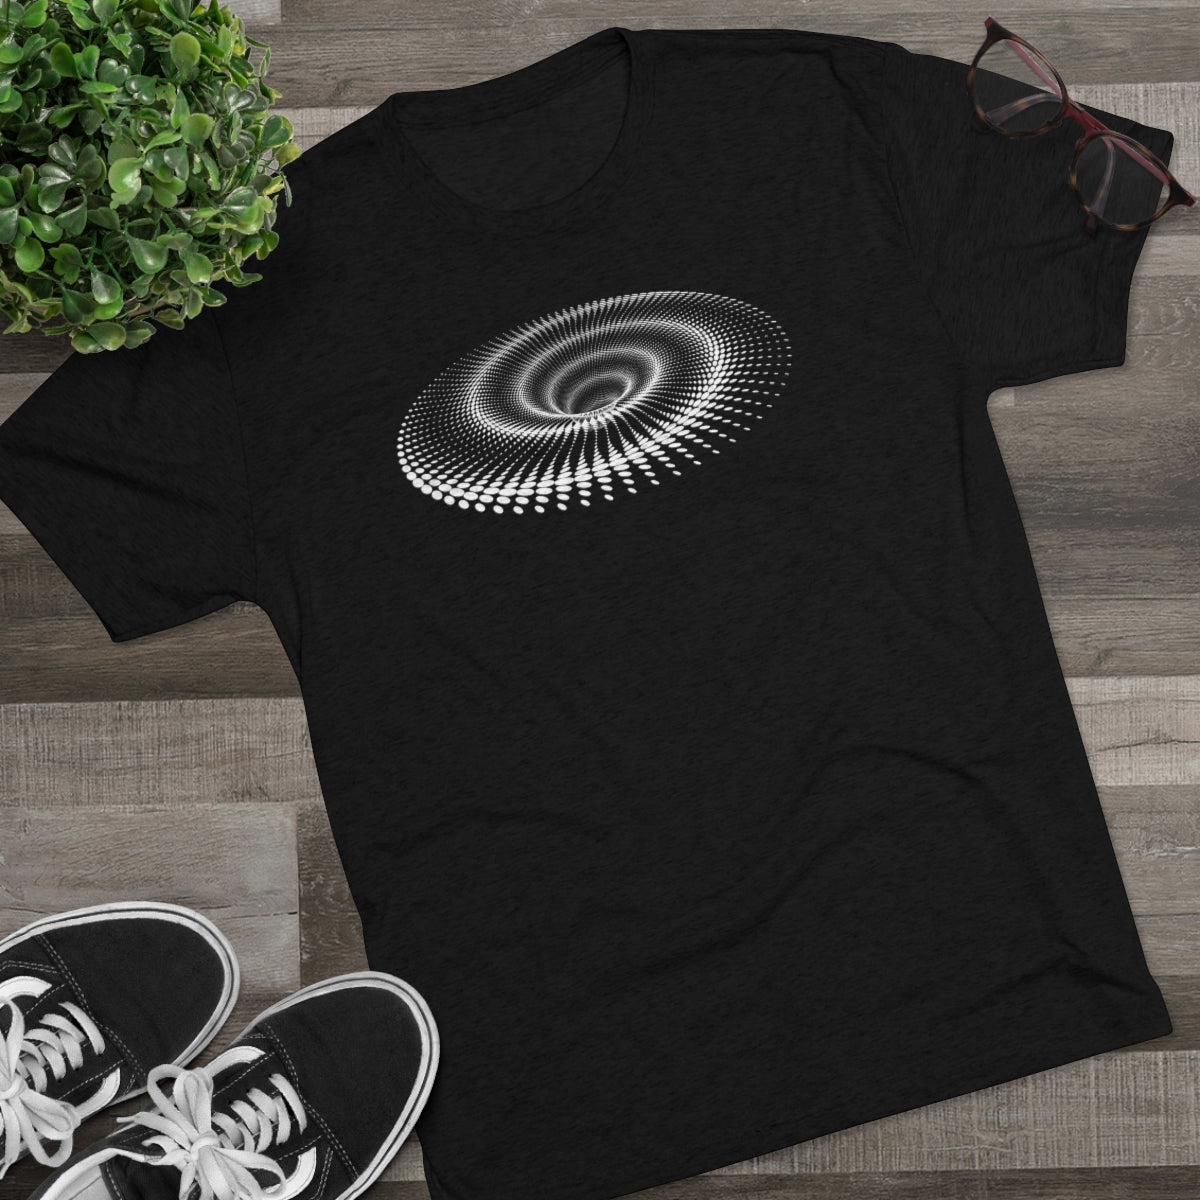 Special Collection – Centric – Black Hole: Unisex Tri-Blend Crew Tee